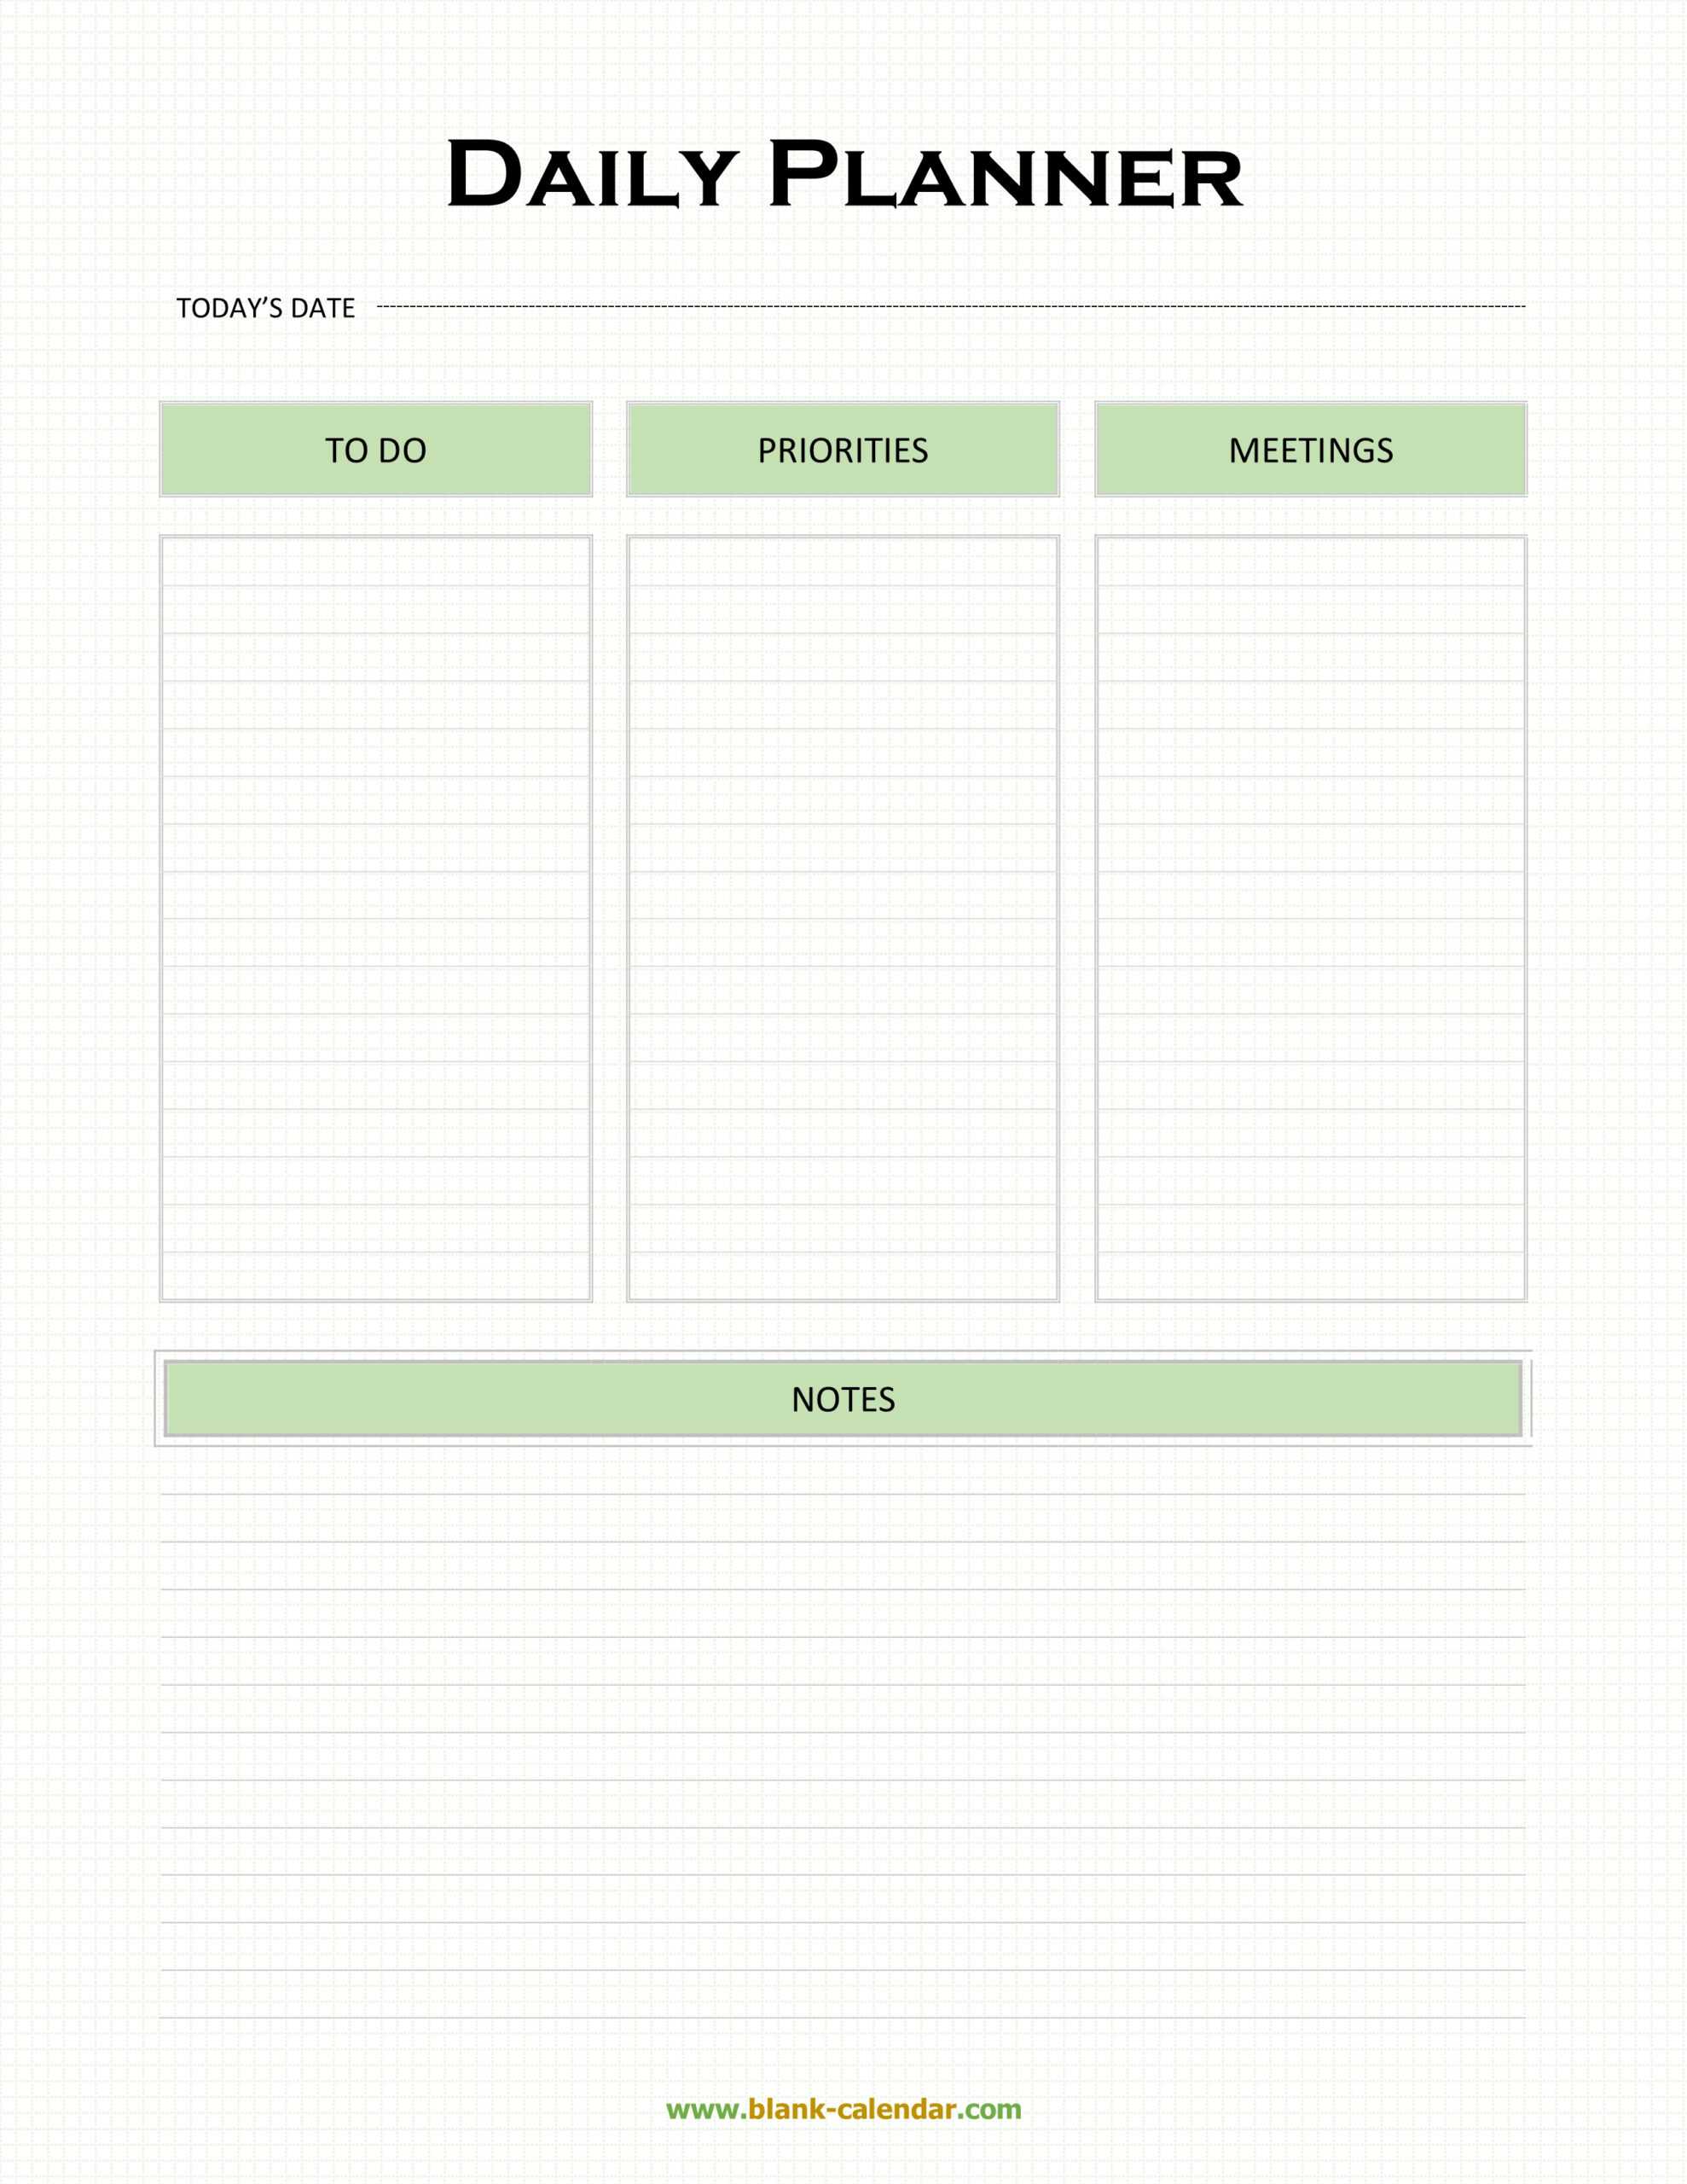 Daily Planner Templates (Word, Excel, Pdf) Throughout Printable Blank Daily Schedule Template